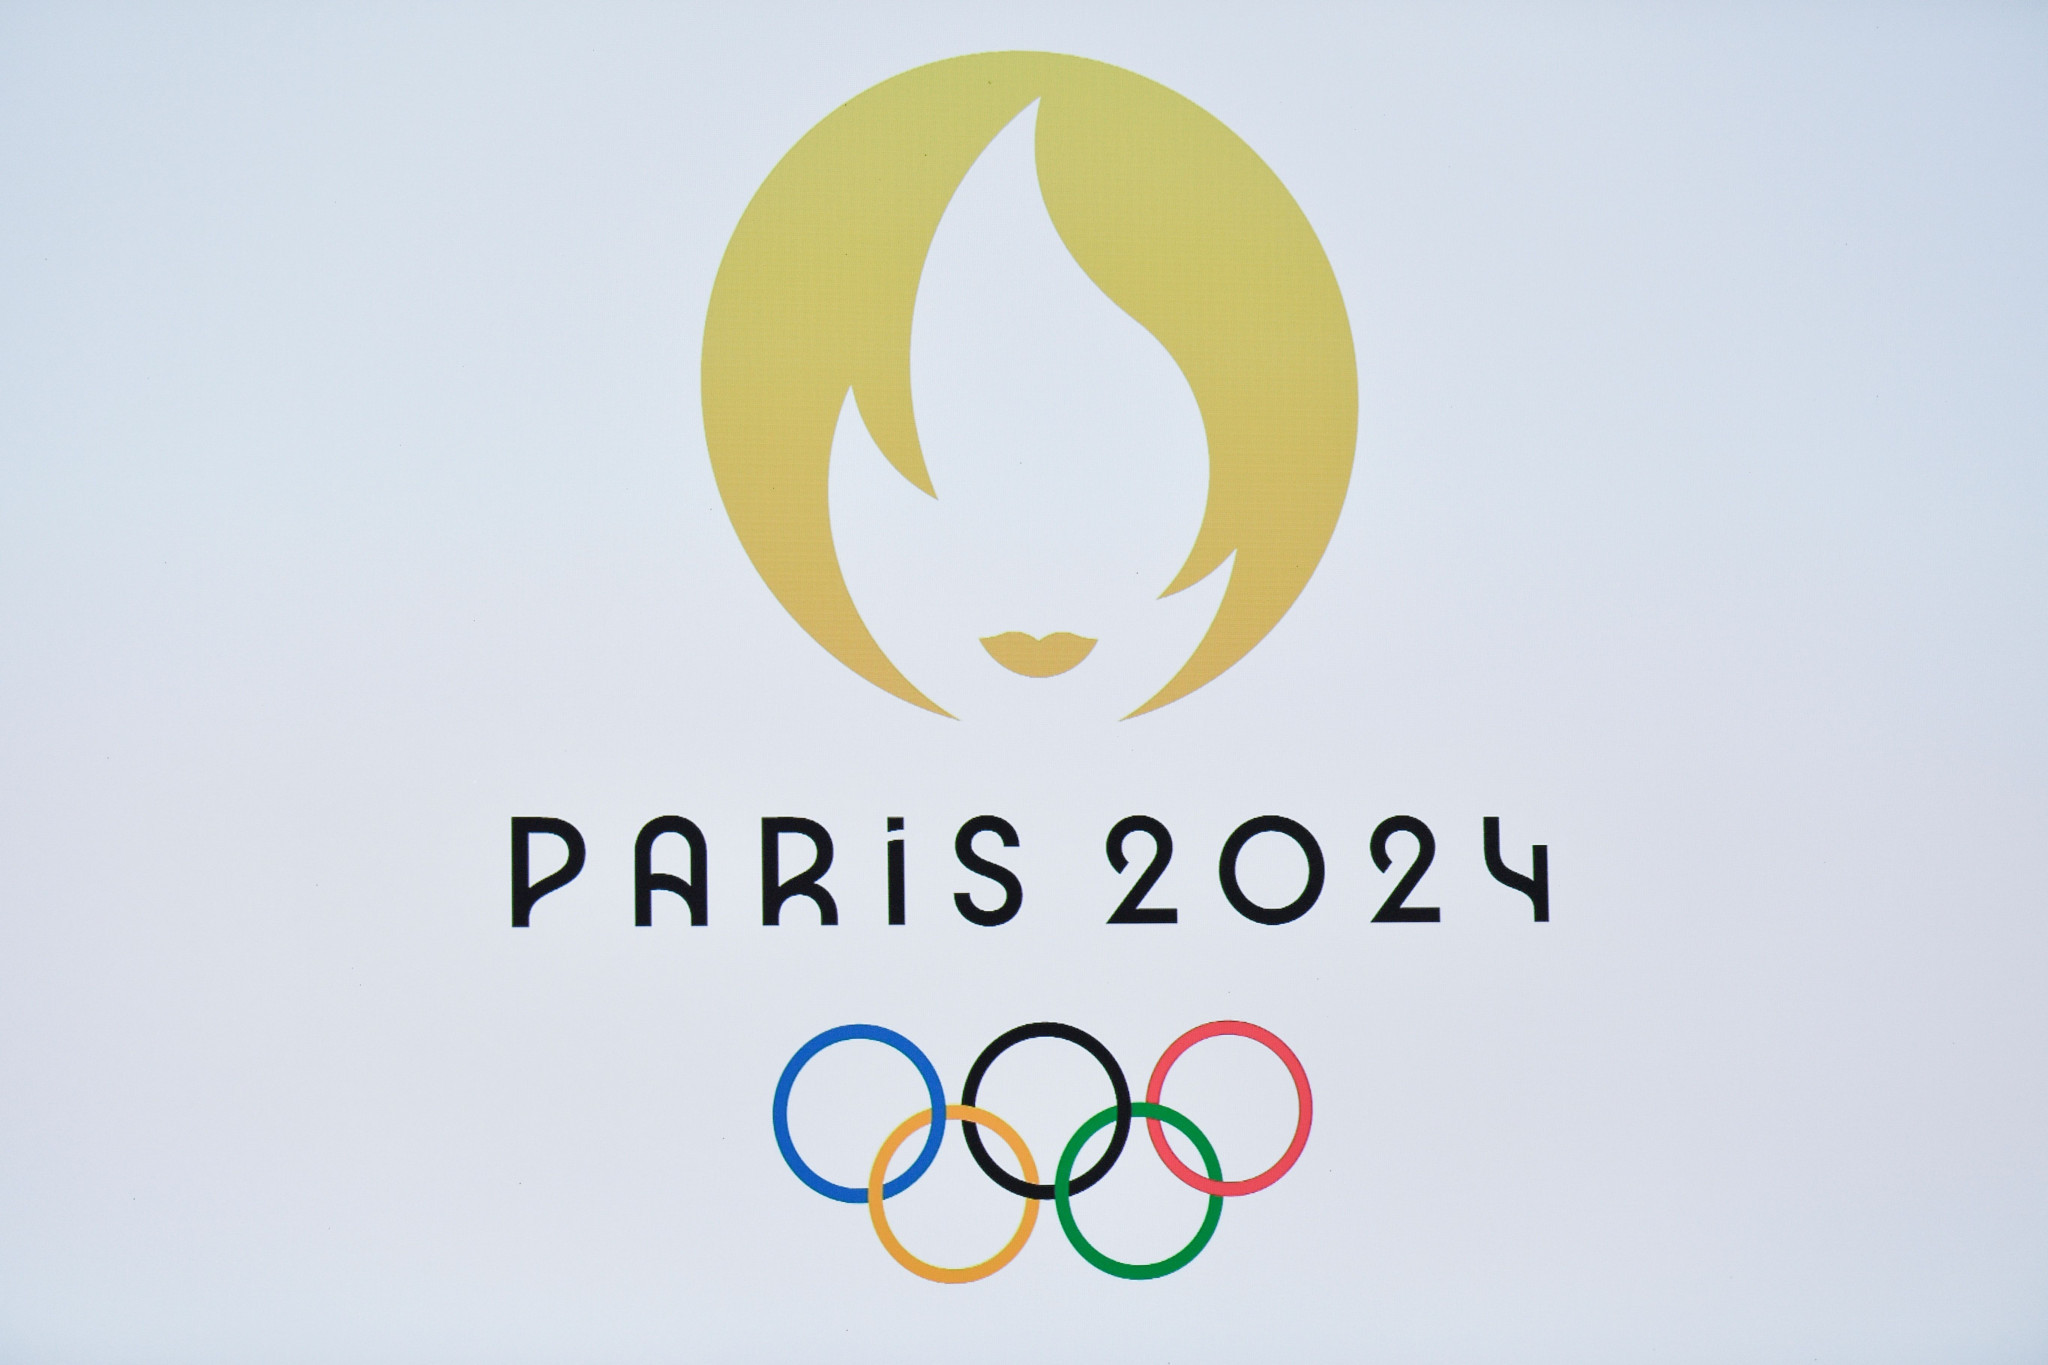 Paris 2024 is seeking companies to join its official licensing programme ©Getty Images